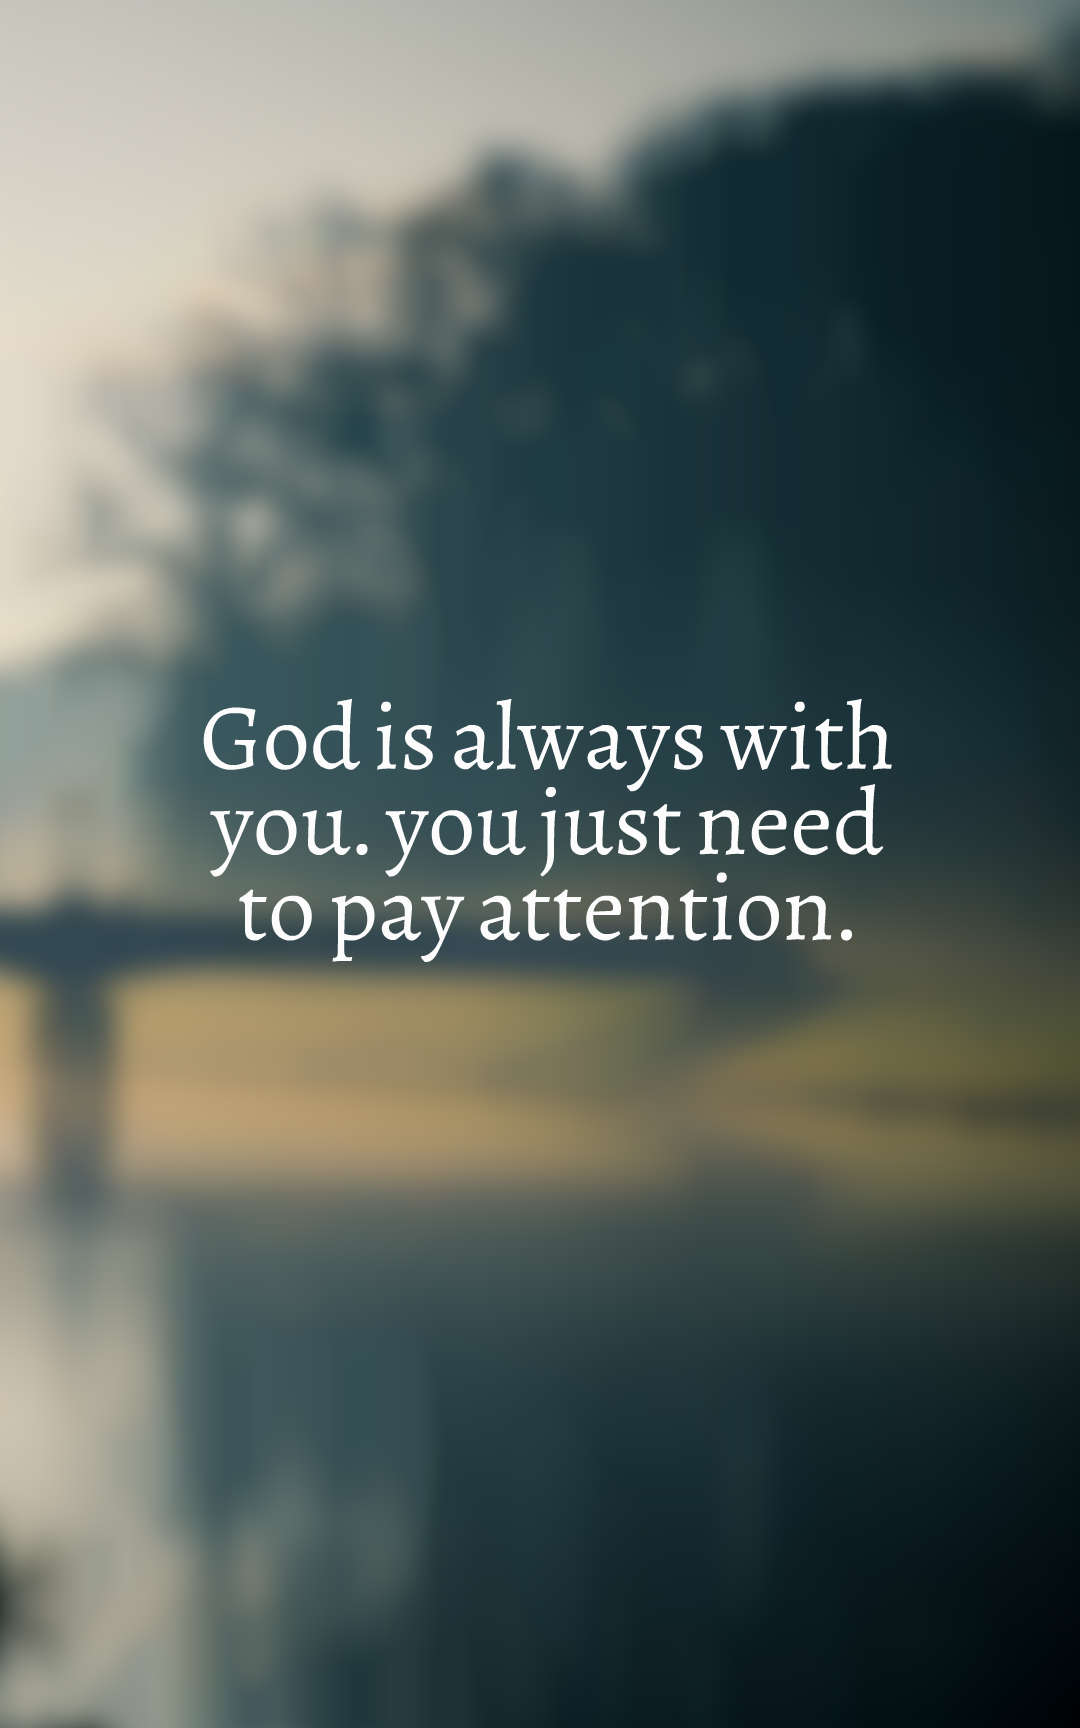 God is always with you… You just need to pay attention.